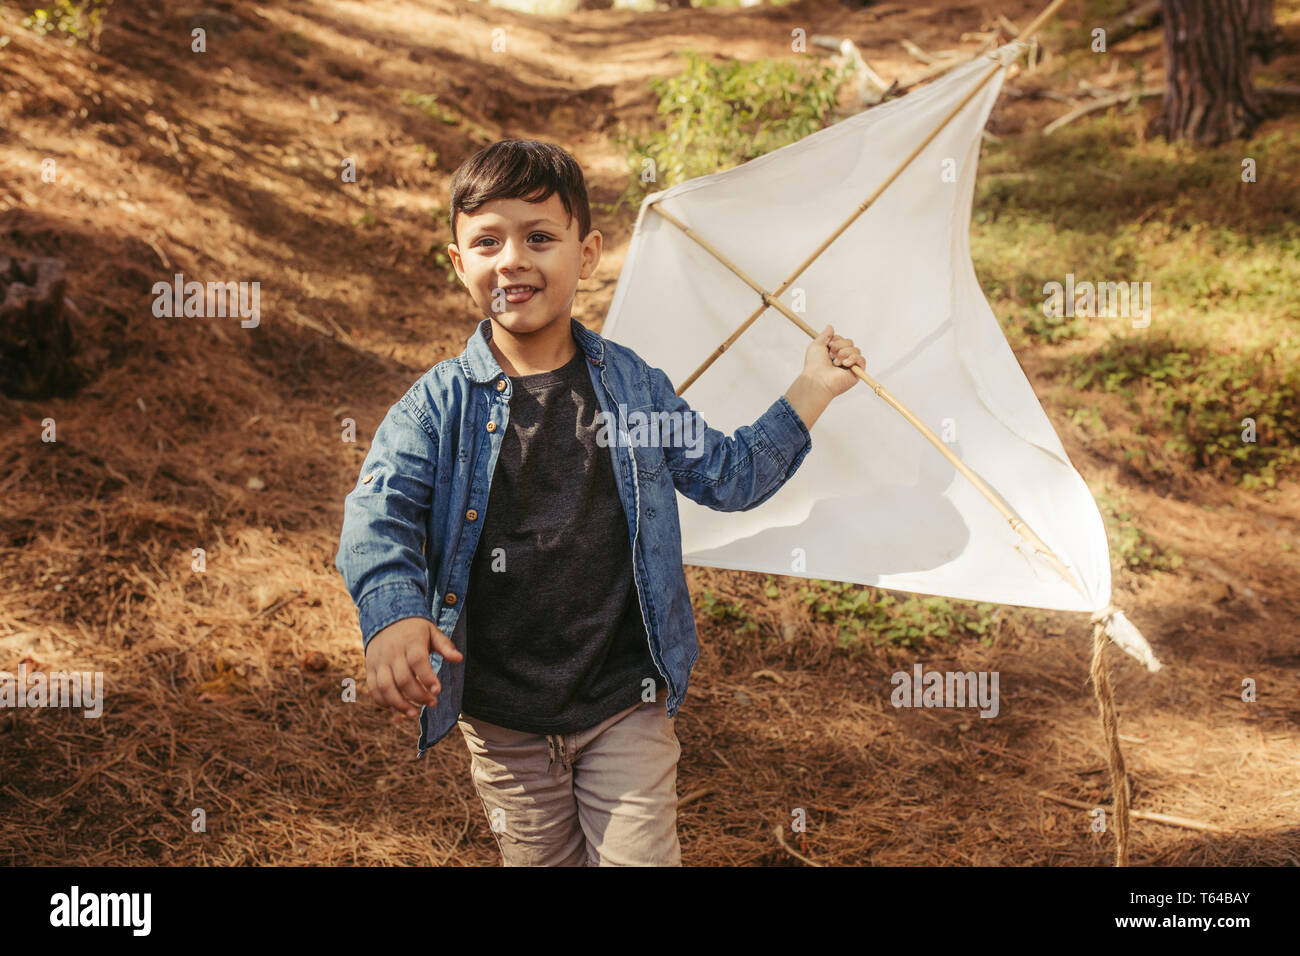 Cute boy running outdoors with a hand made kite. Child playing with a kite in forest. Stock Photo